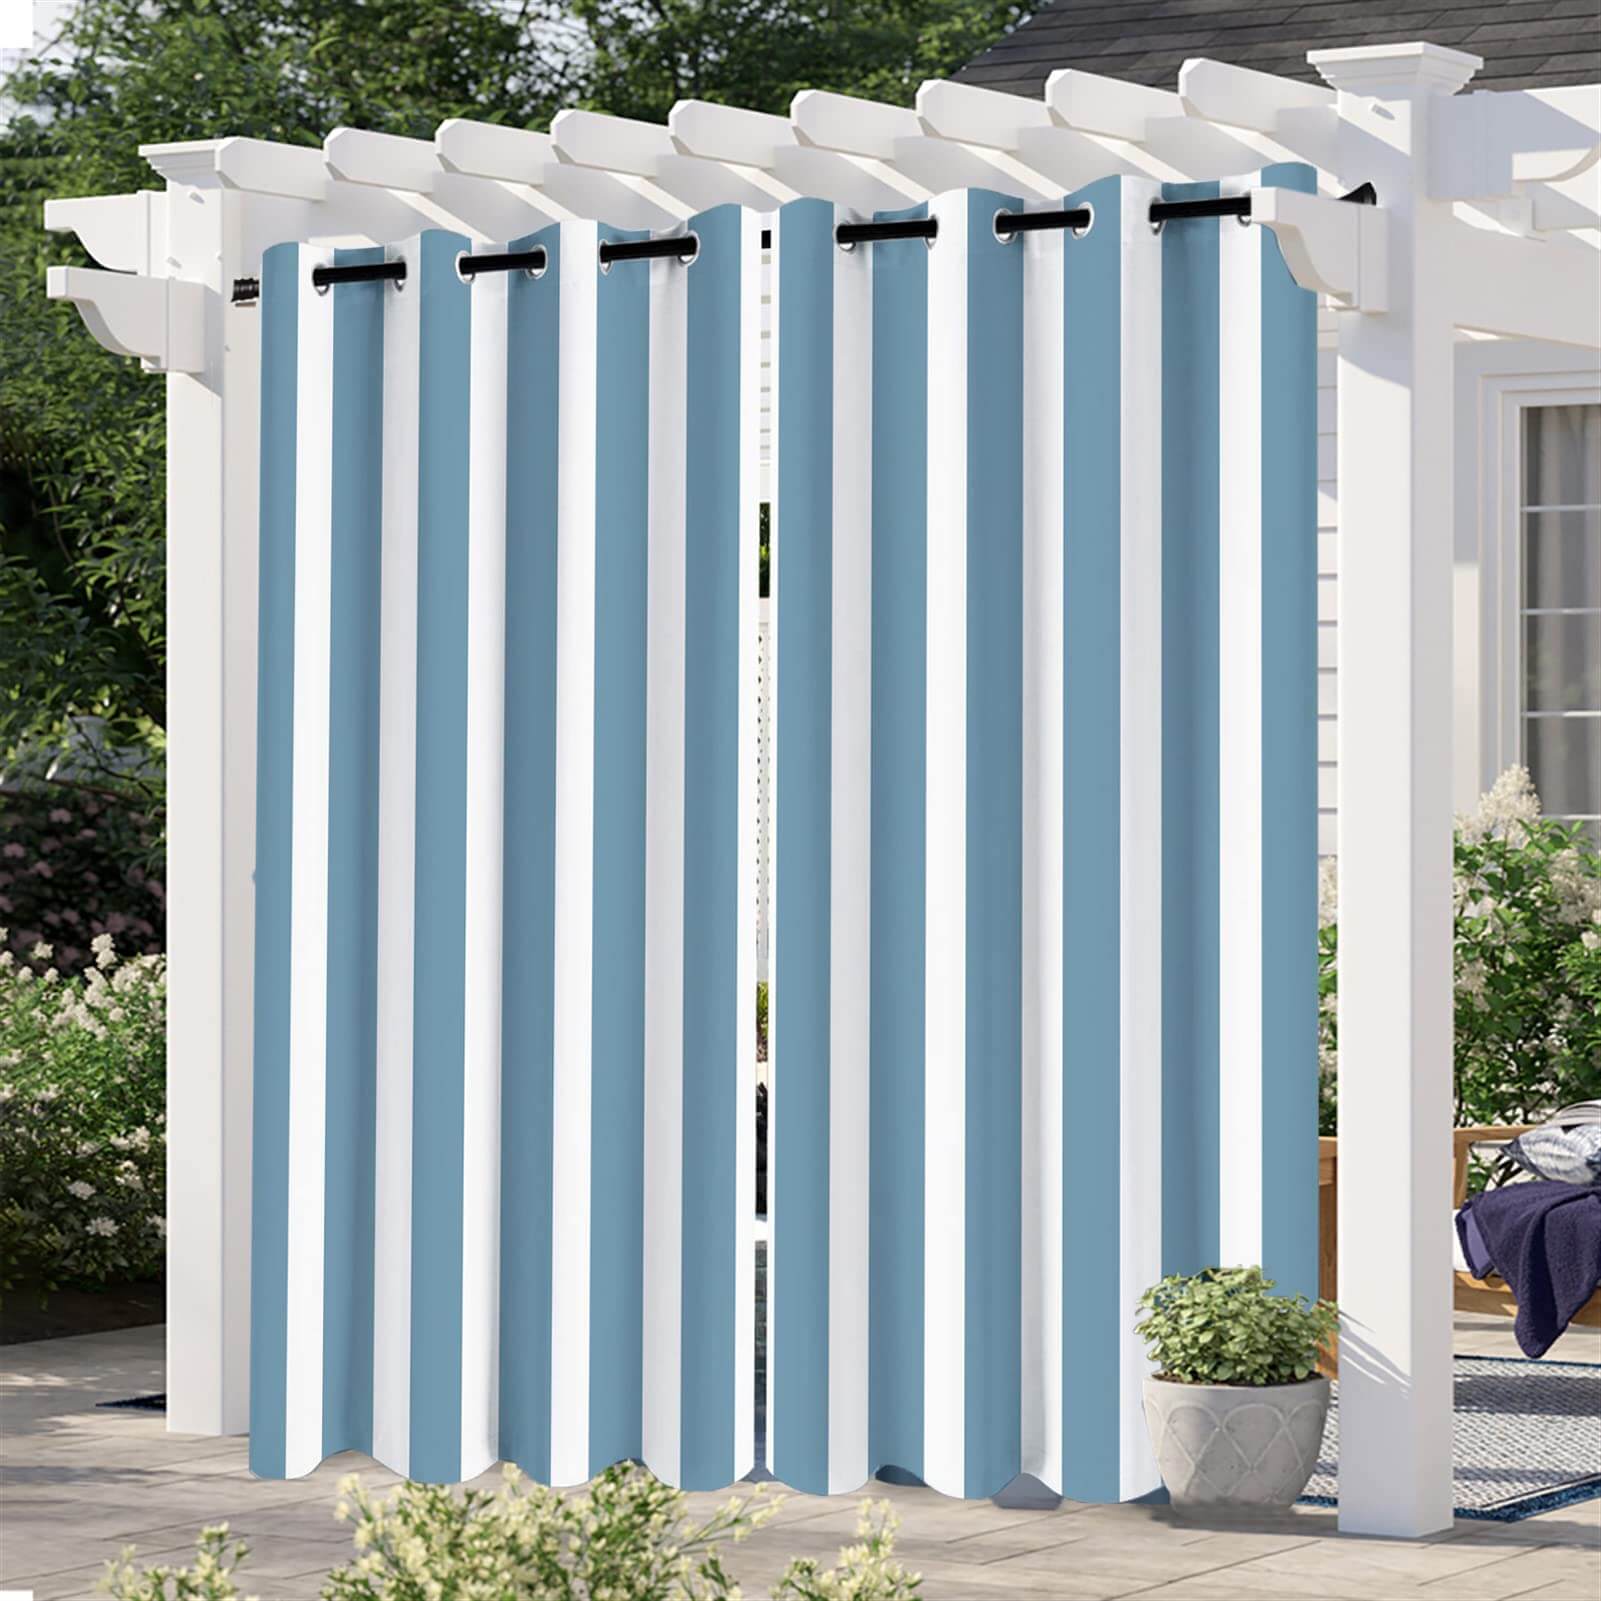 Pale Blue Stripe Curtains/Drapes 1 Panel | Waterproof Curtains Grommet Top & Bottom | Custom Outdoor Curtains